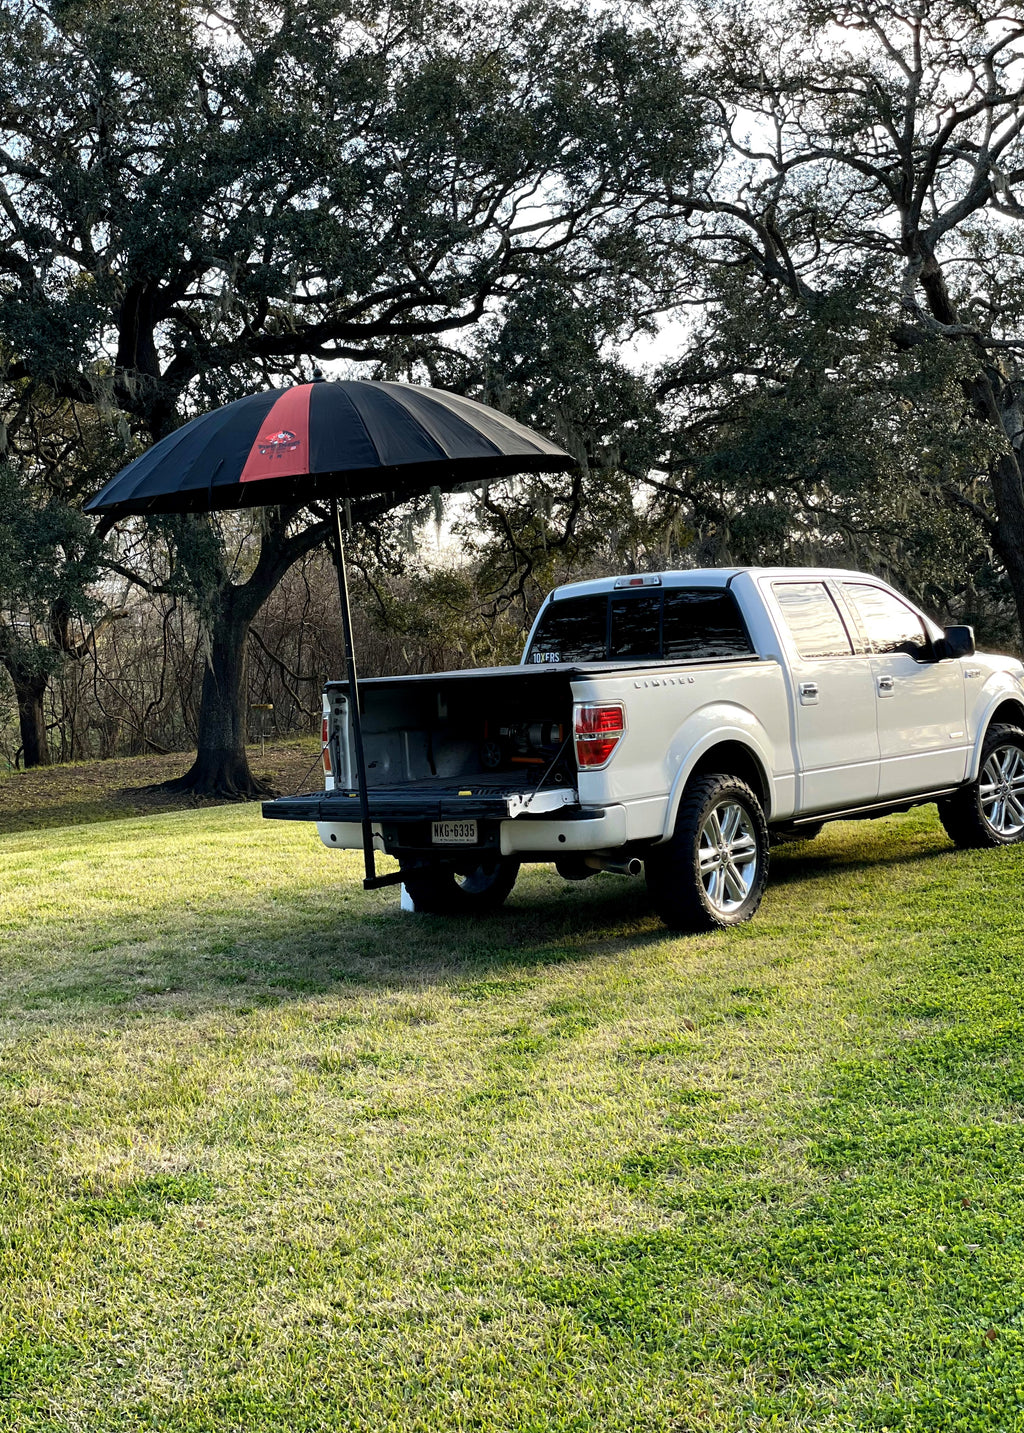 8' Pipeliners Cloud Umbrella Tailgaters Complete Shade System